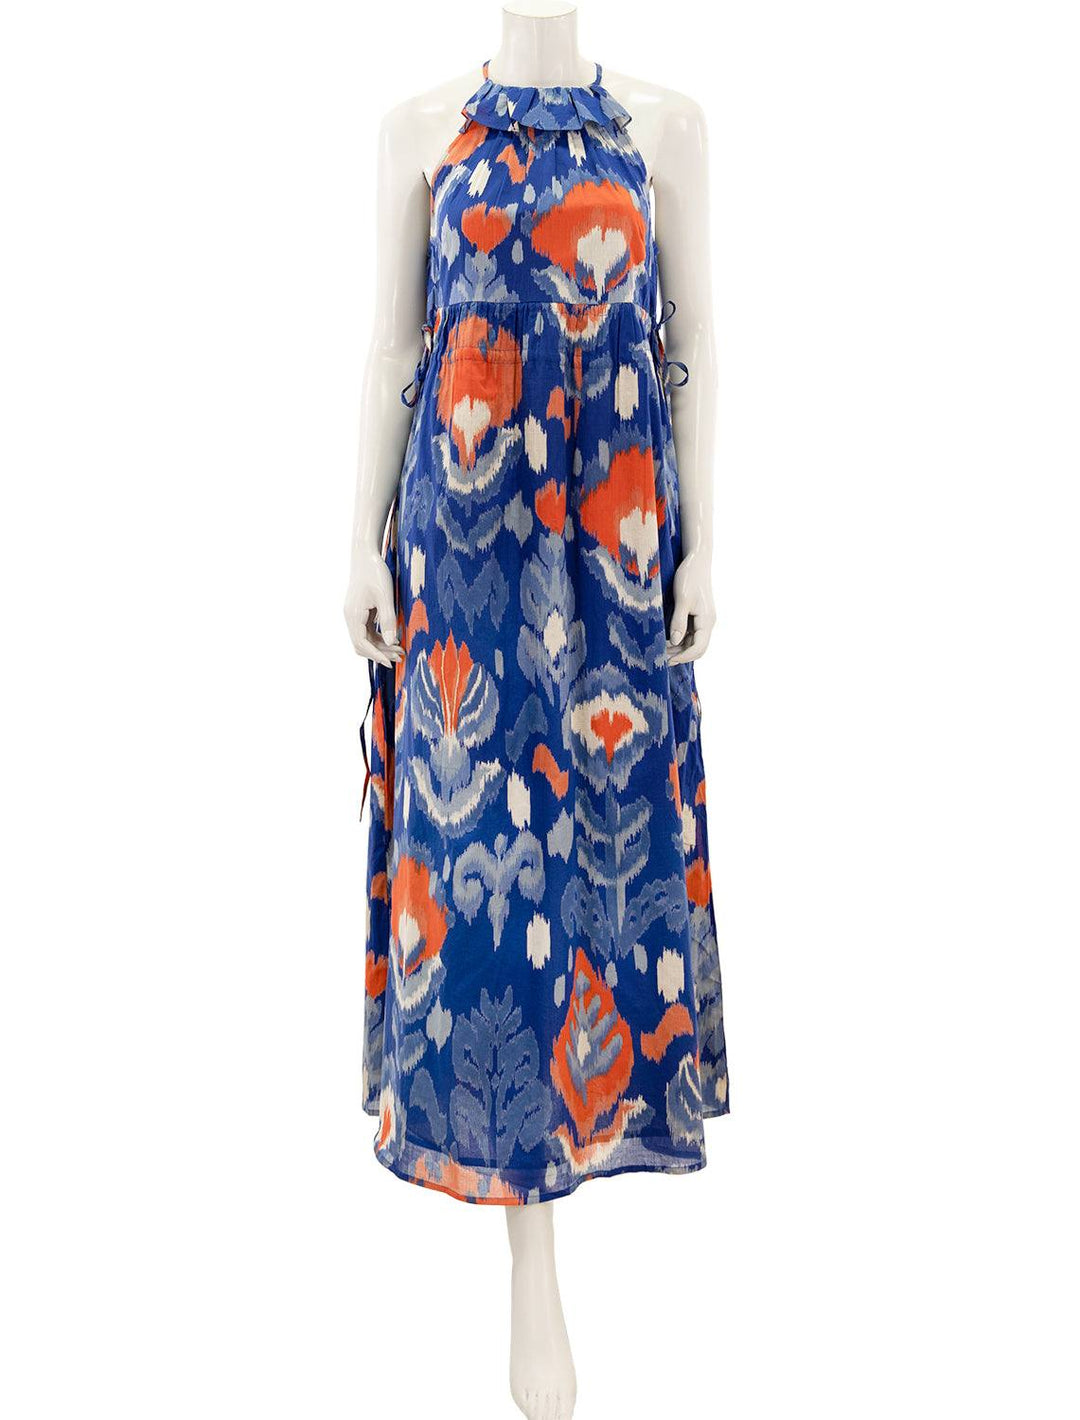 Front view of Banjanan's lucia dress in ikat floral sodalite.